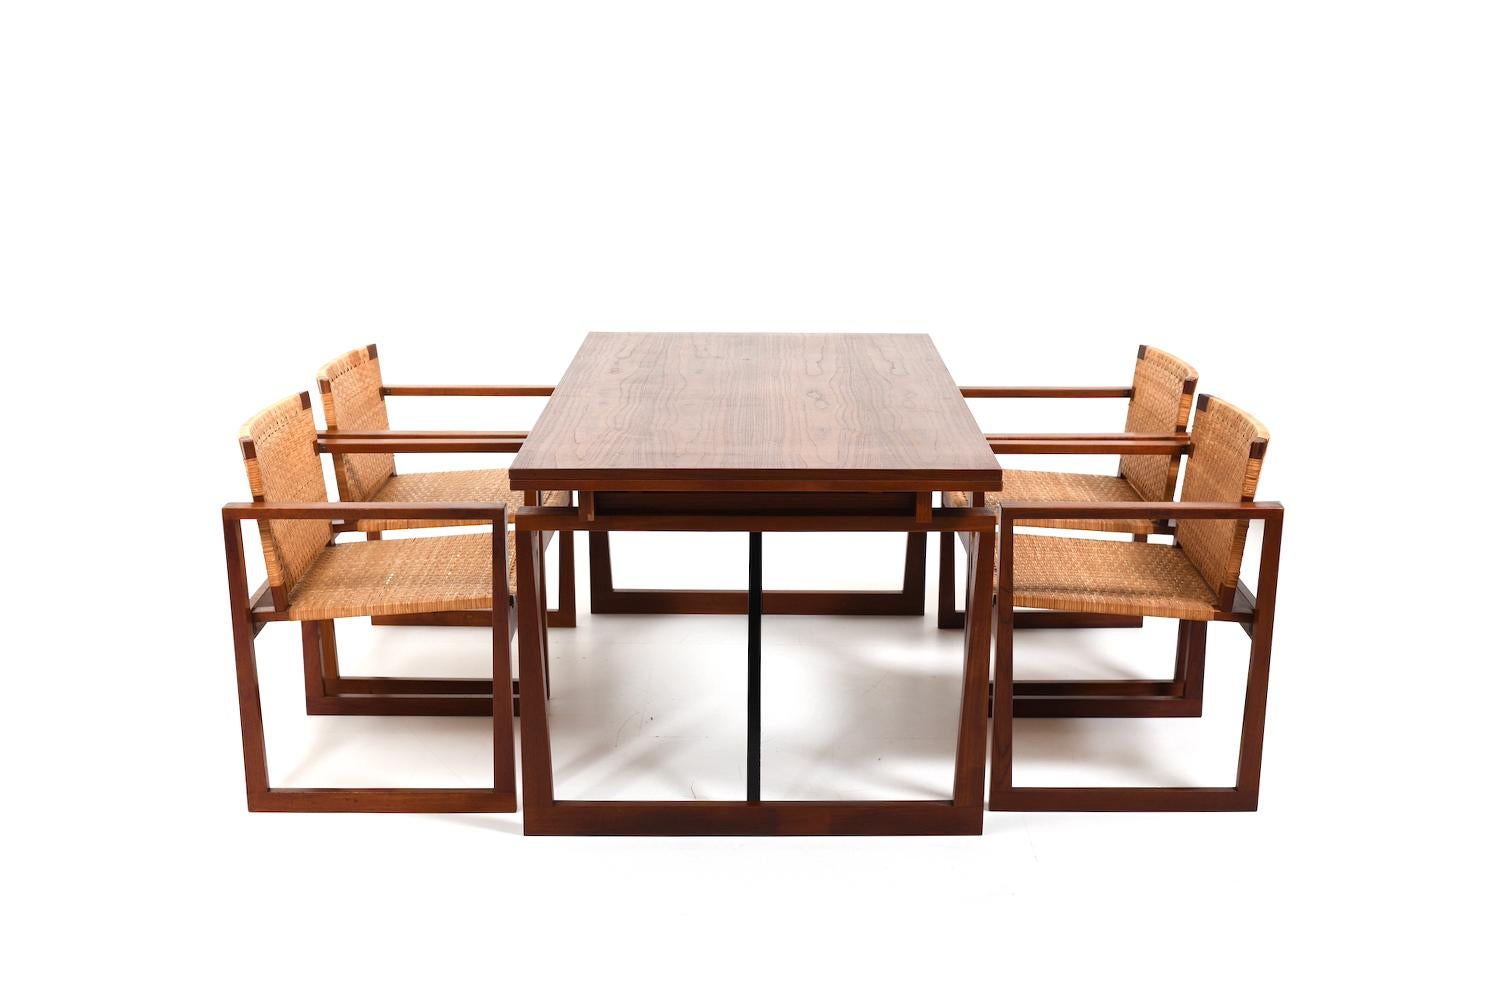 Beautiful danish Dining set incl. 4 armchairs with cane and extendable table up to 270 cm. Standing on a conical sled base. Made in teak and cane. Denmark 1960s. In very good quality.
Table: H. 73 cm / W. 150 cm - 270 cm / D. 86.5 cm
chairs: H. 73.5